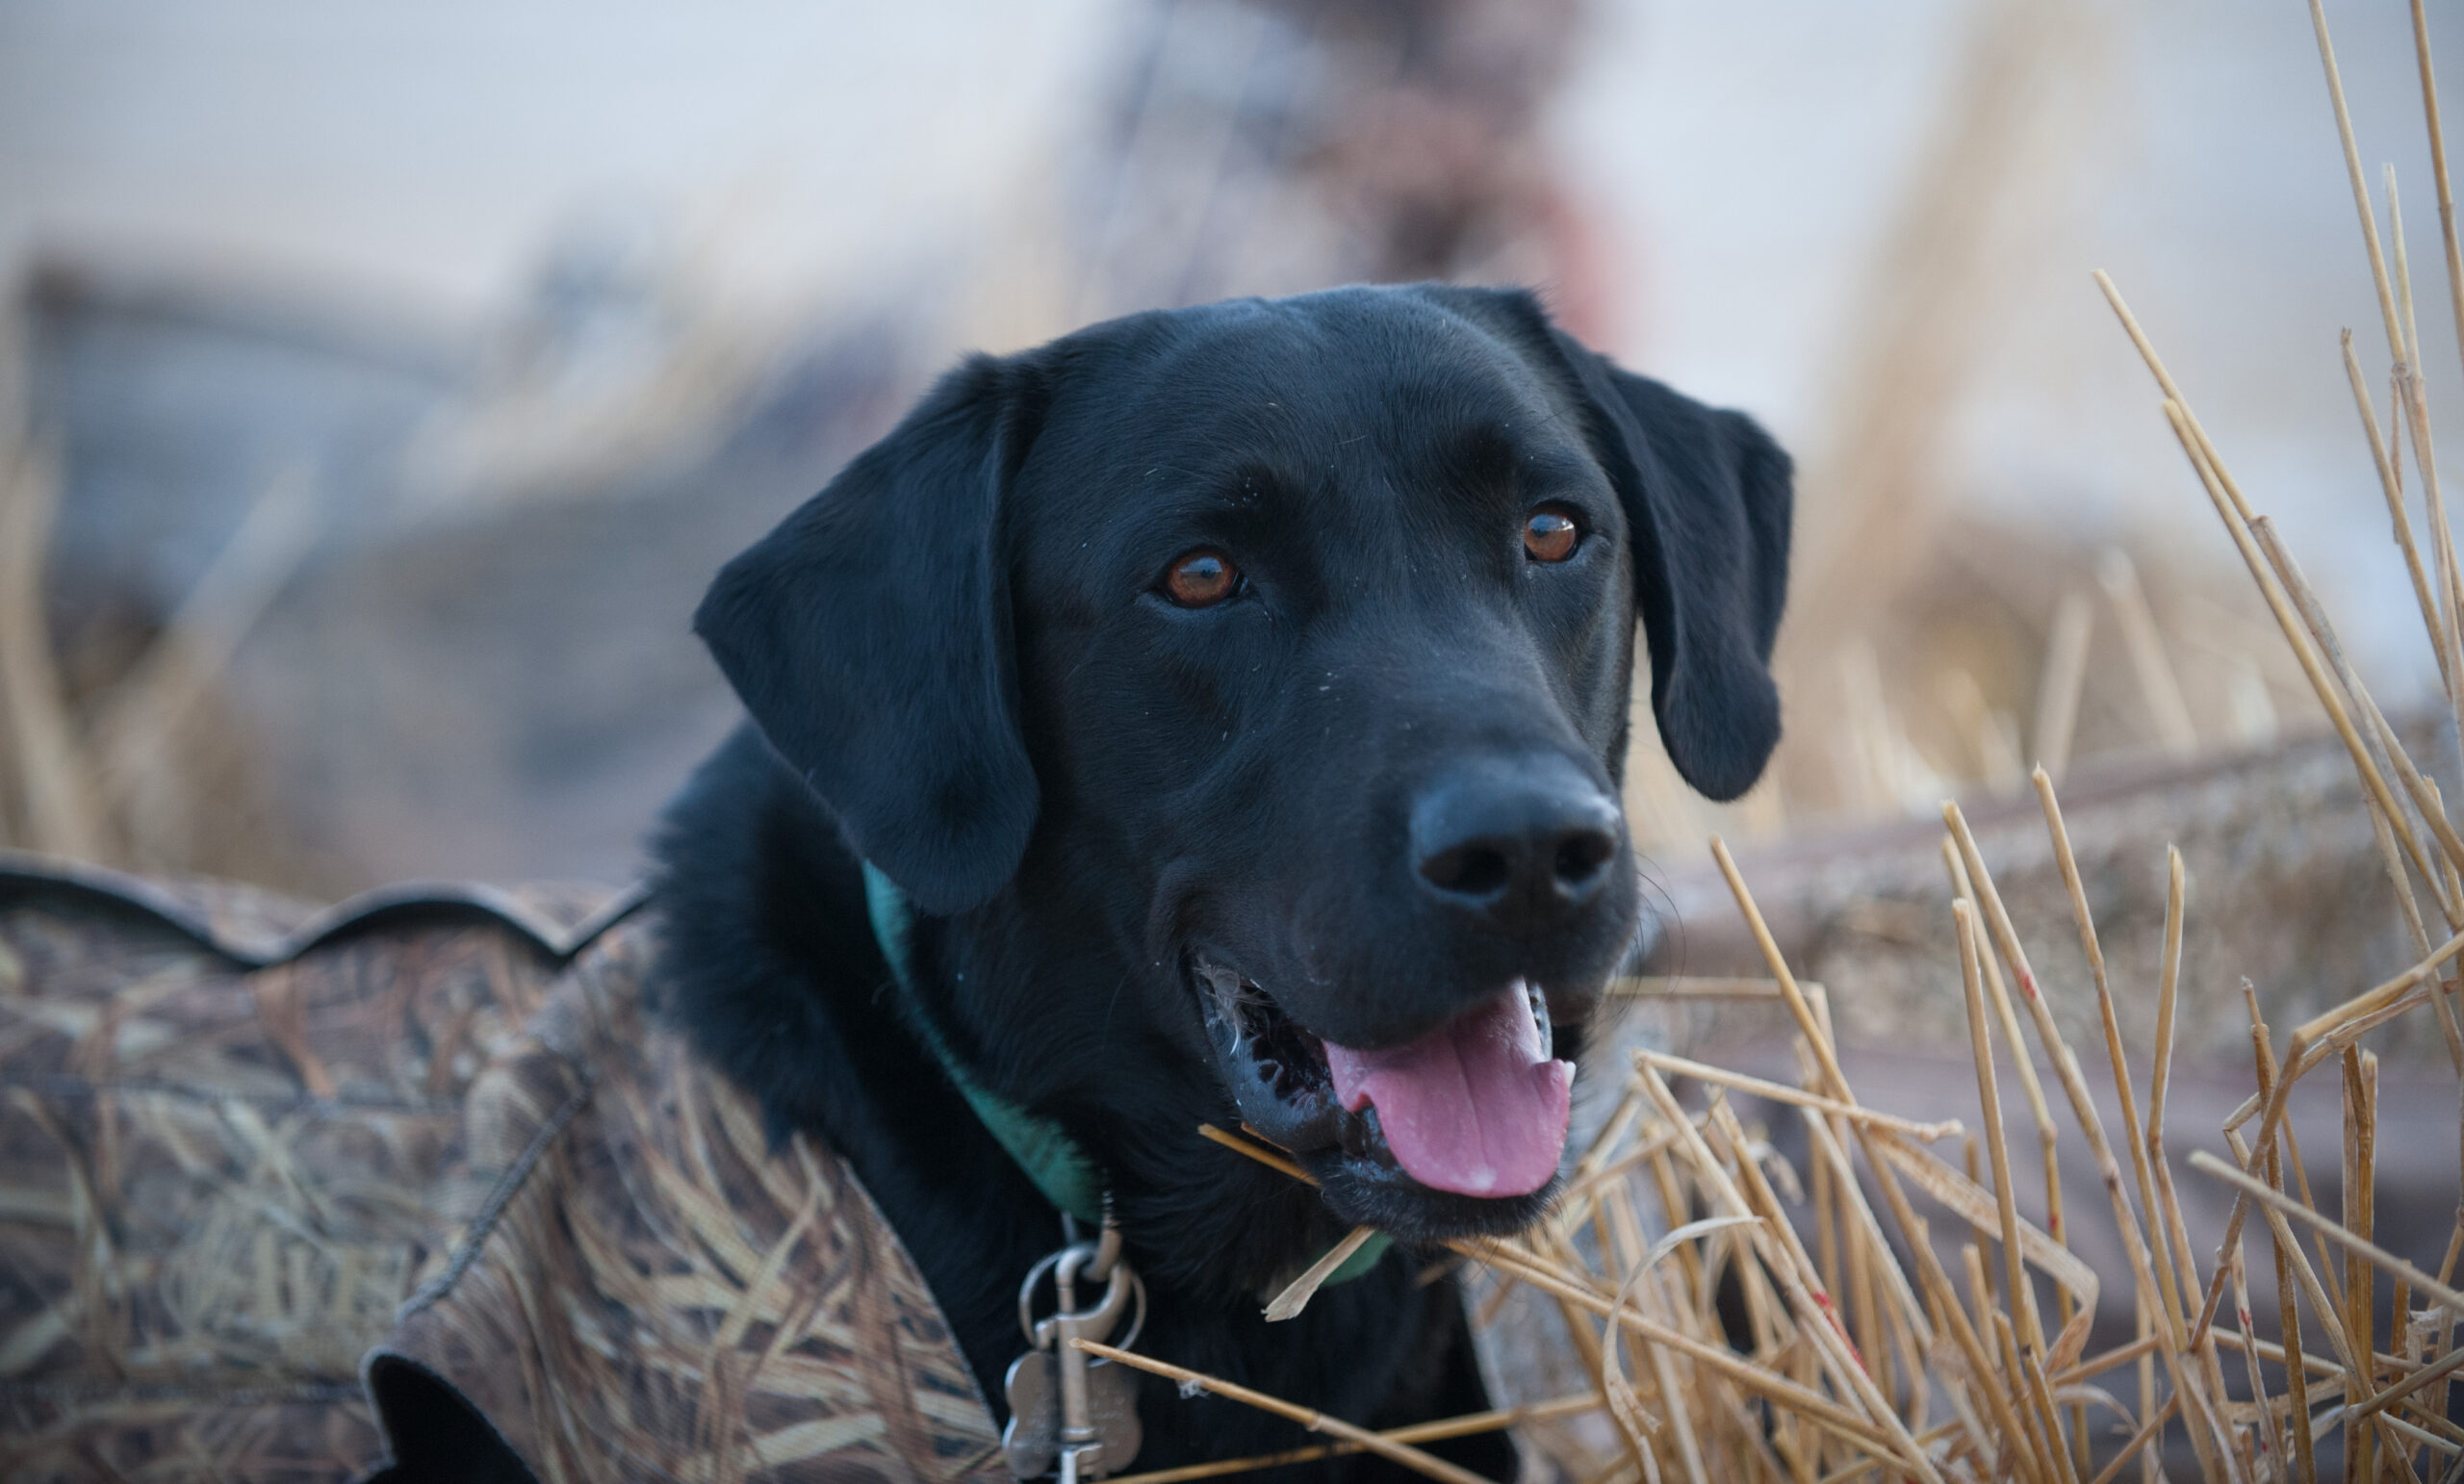 A hunting dog can be seen in a field wearing a protective vest.